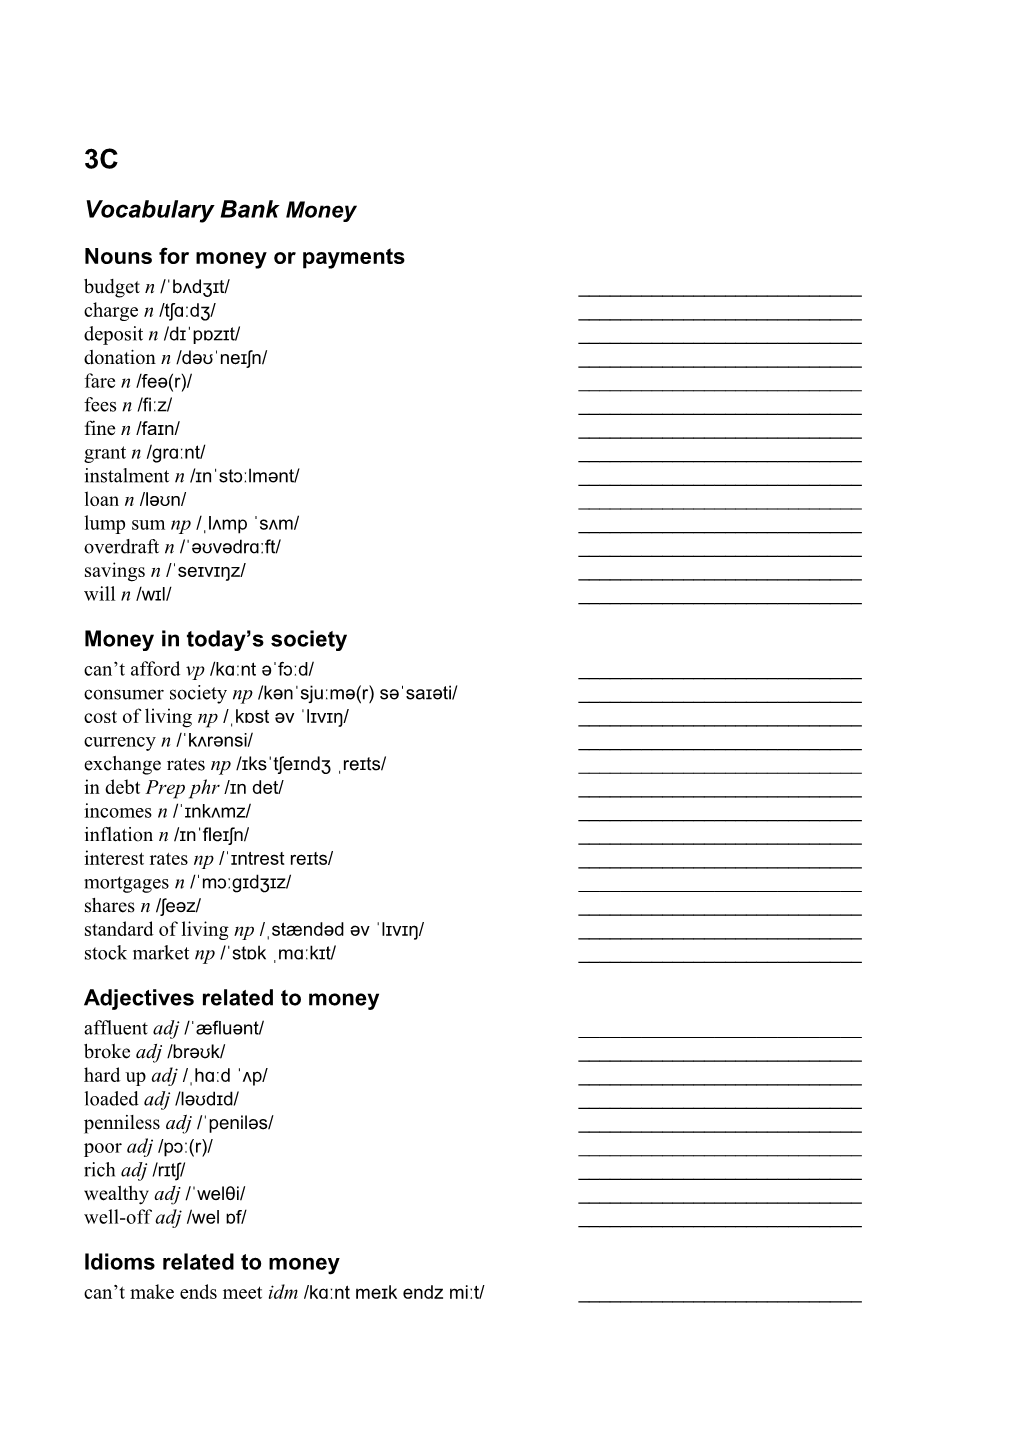 Nouns for Money Or Payments